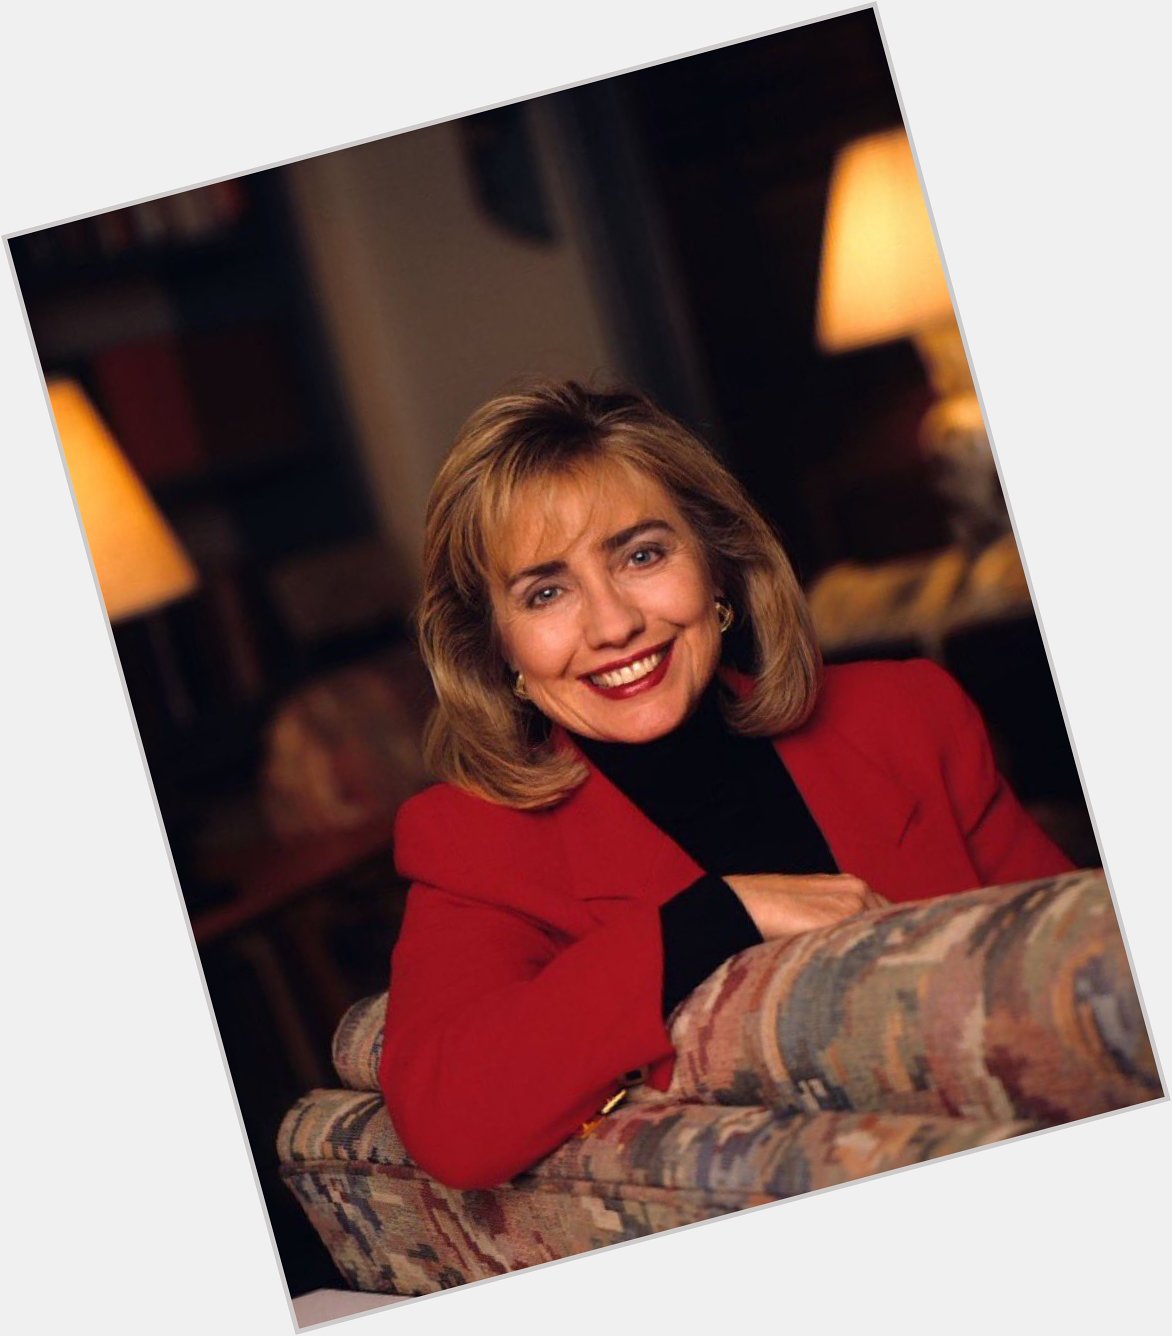 Hillary Clinton. 1992.

Happy 75th birthday to Hillary Clinton! Born on this day in 1947. 